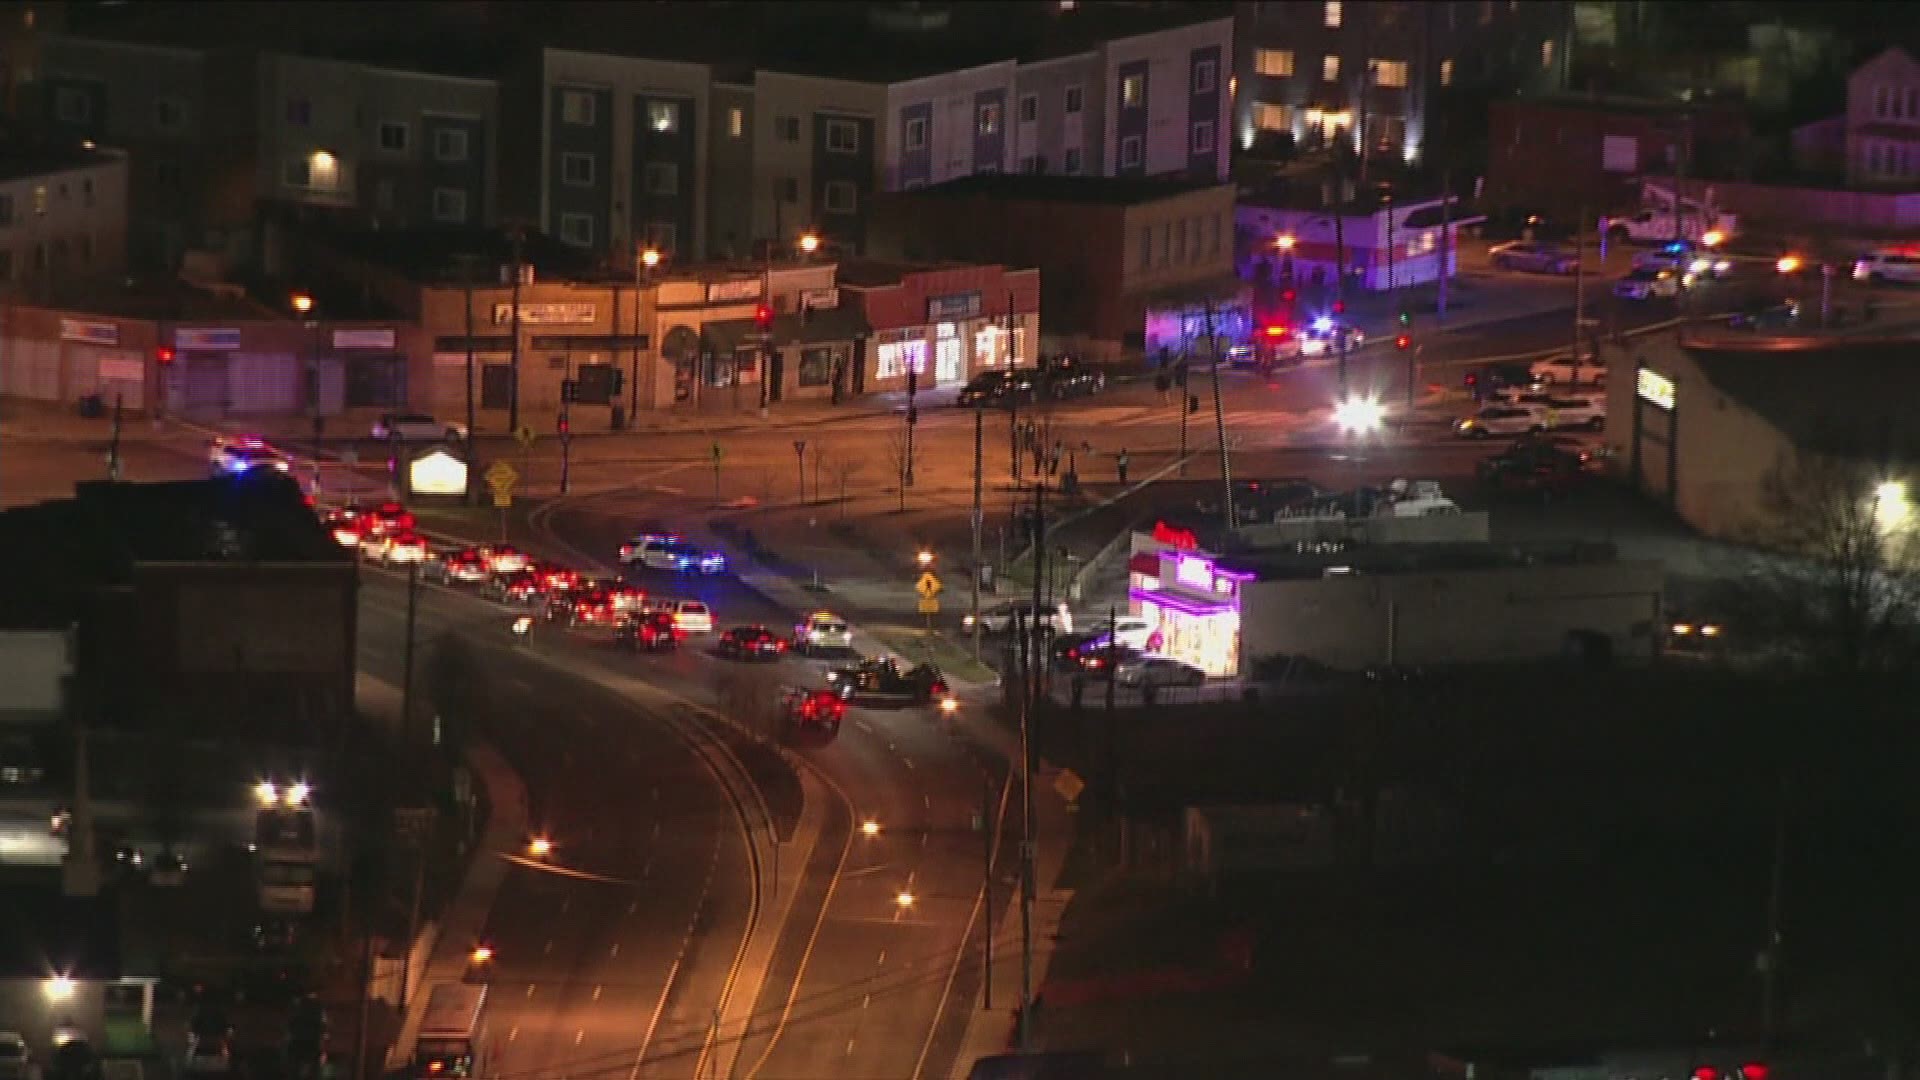 DC Police said three shooters left the scene in a silver minivan and are still on the loose.